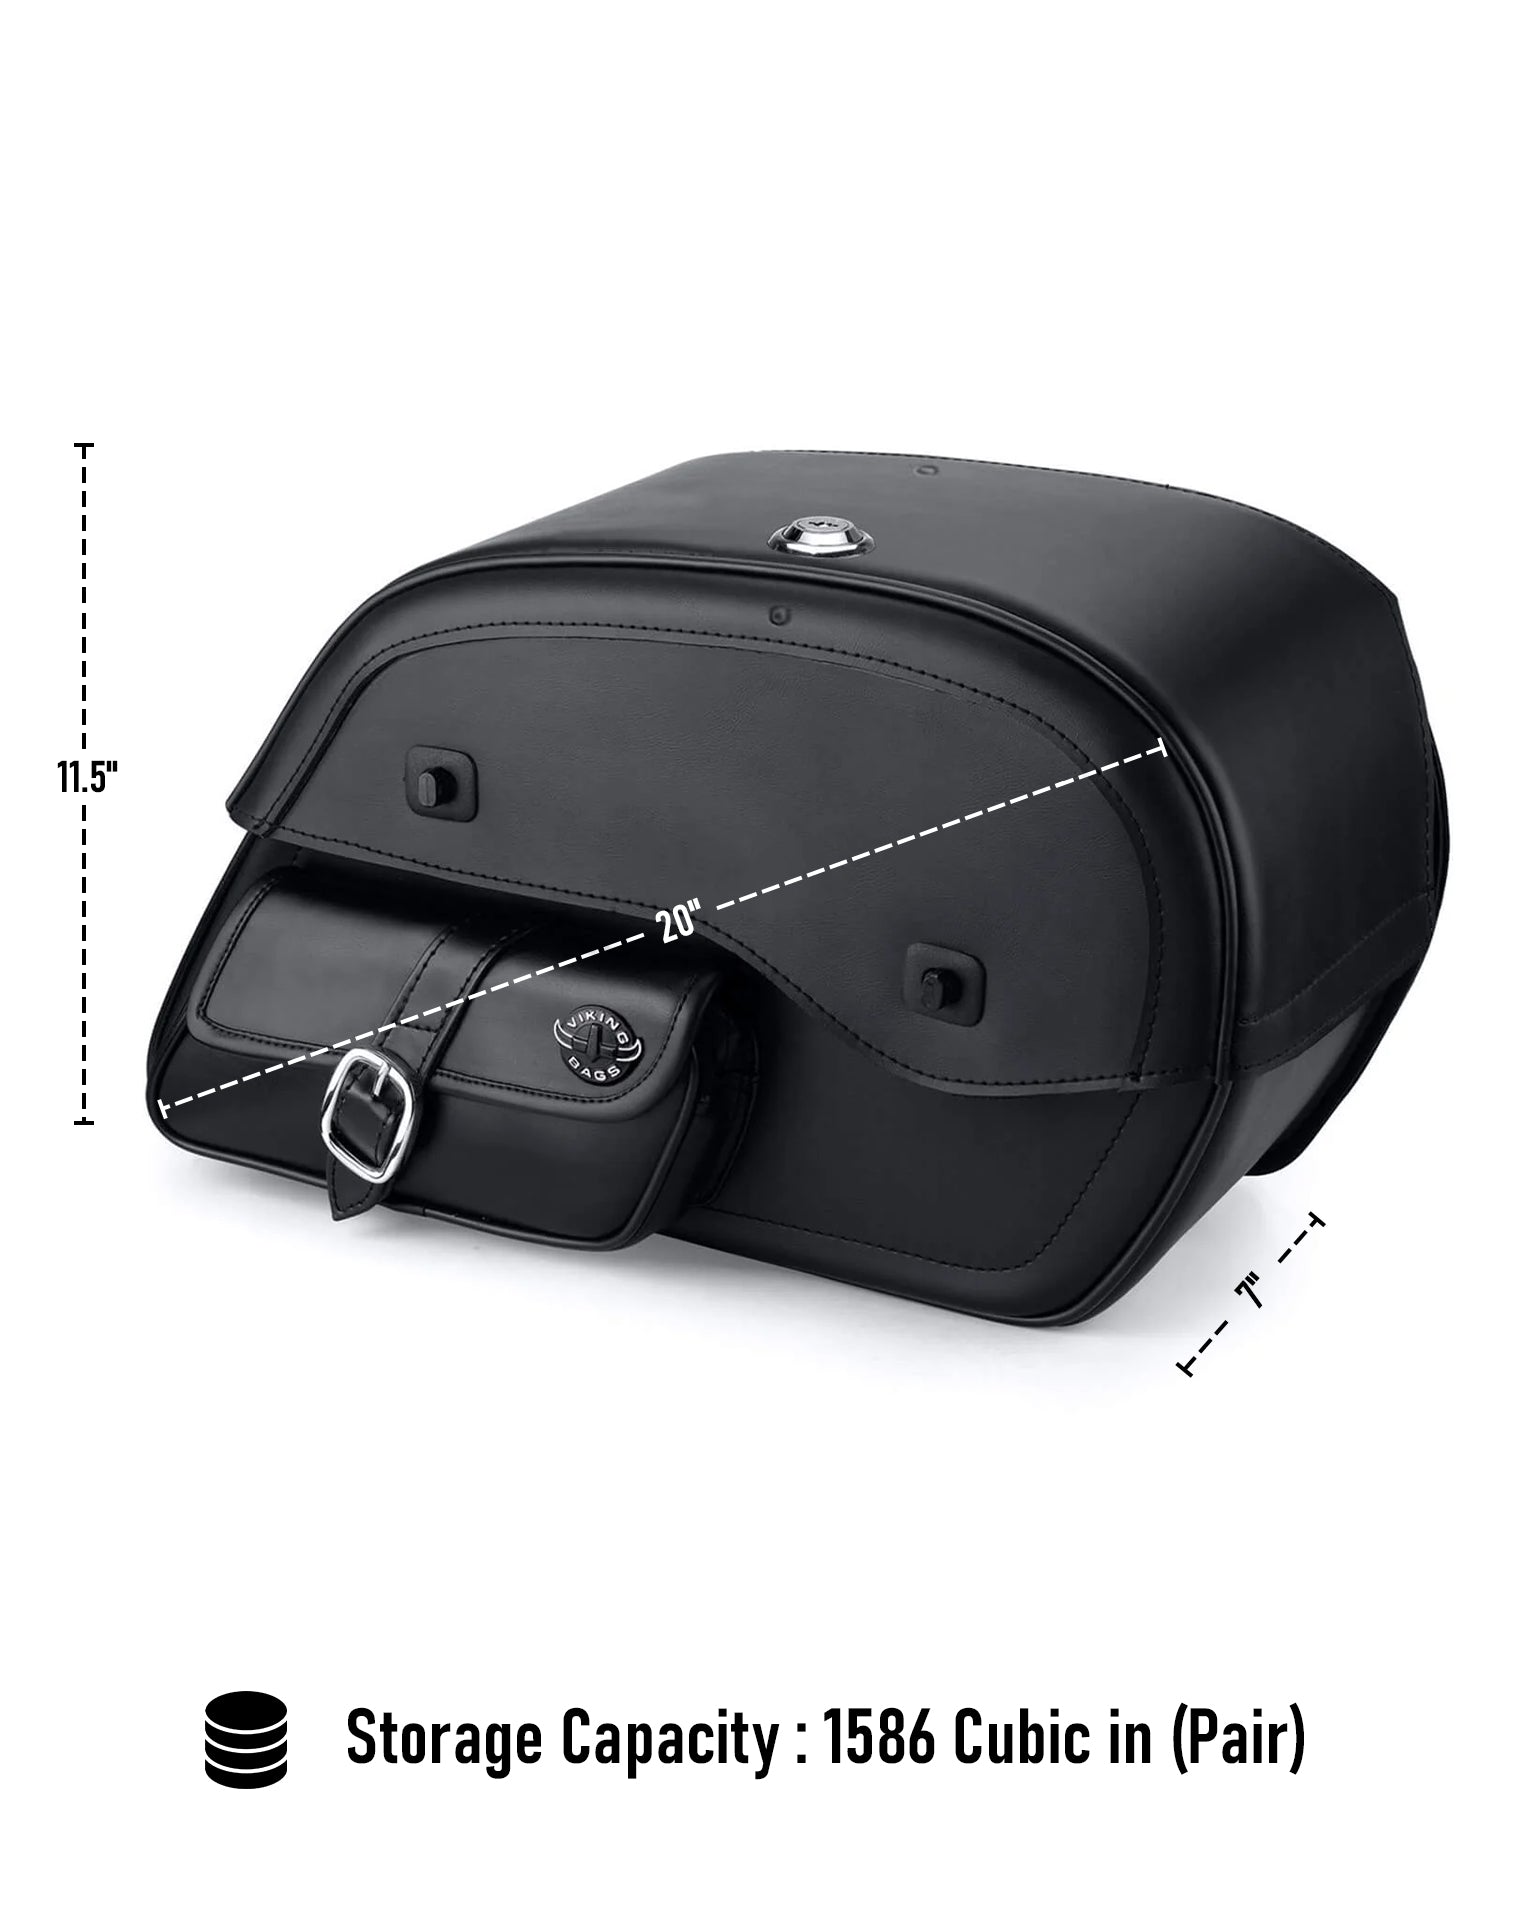 Viking Essential Side Pocket Large Shock Cutout Leather Motorcycle Saddlebags For Harley Sportster 72 Xl1200V Can Store Your Ridings Gears